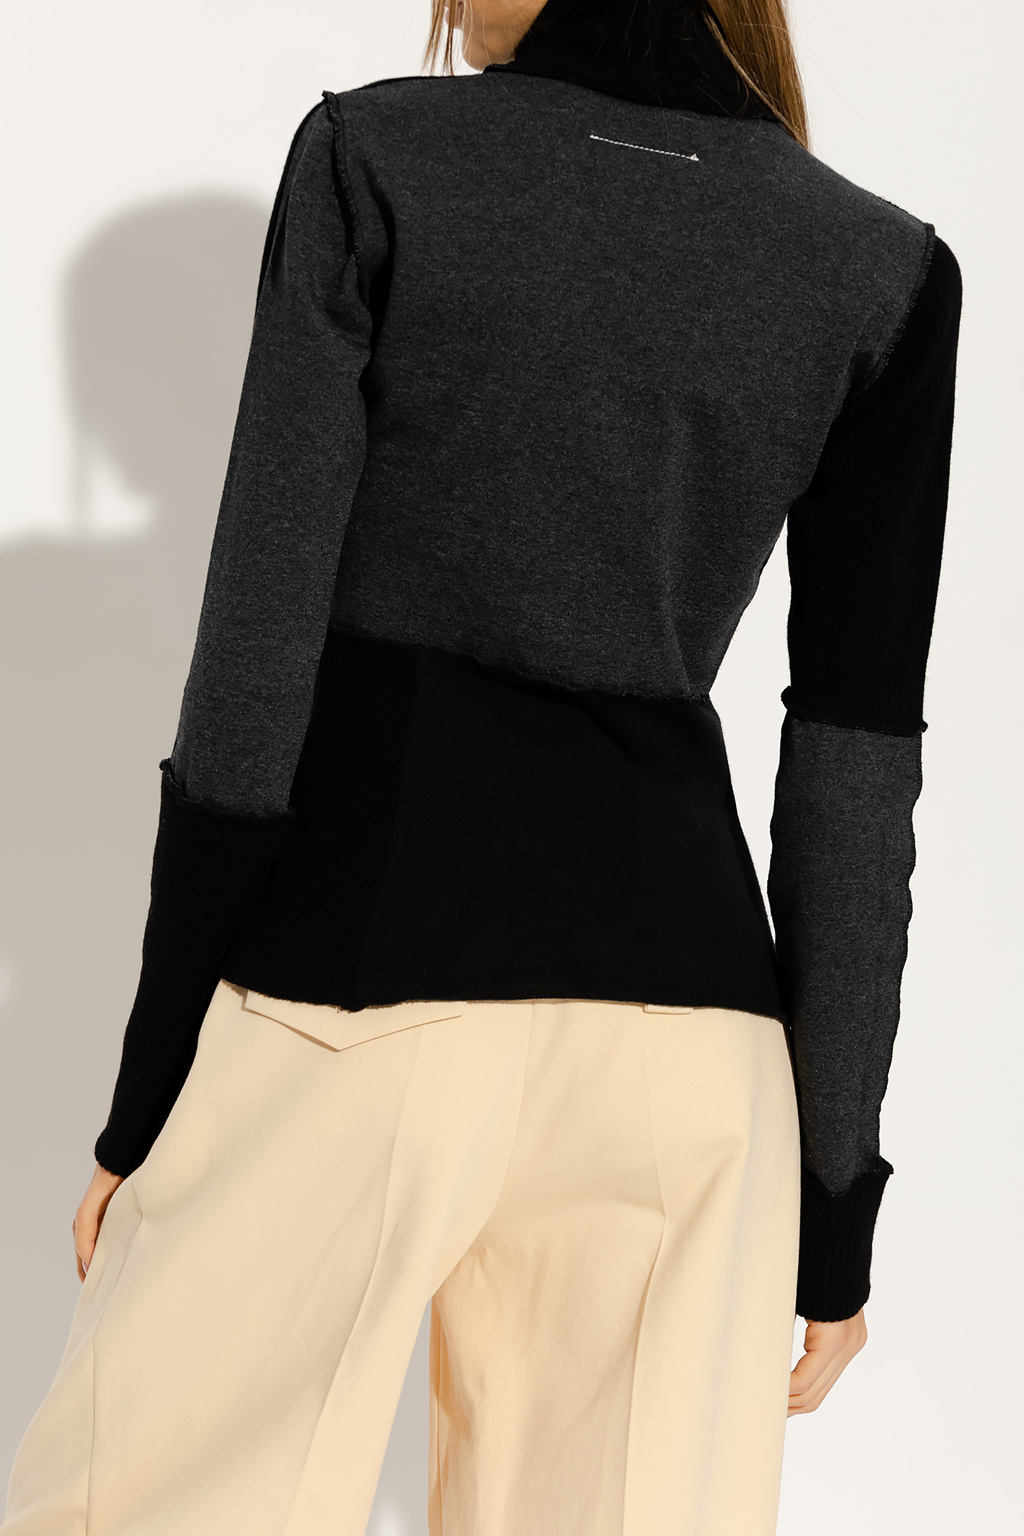 MM6 Maison Margiela Turtleneck sweater abstract with stitching details